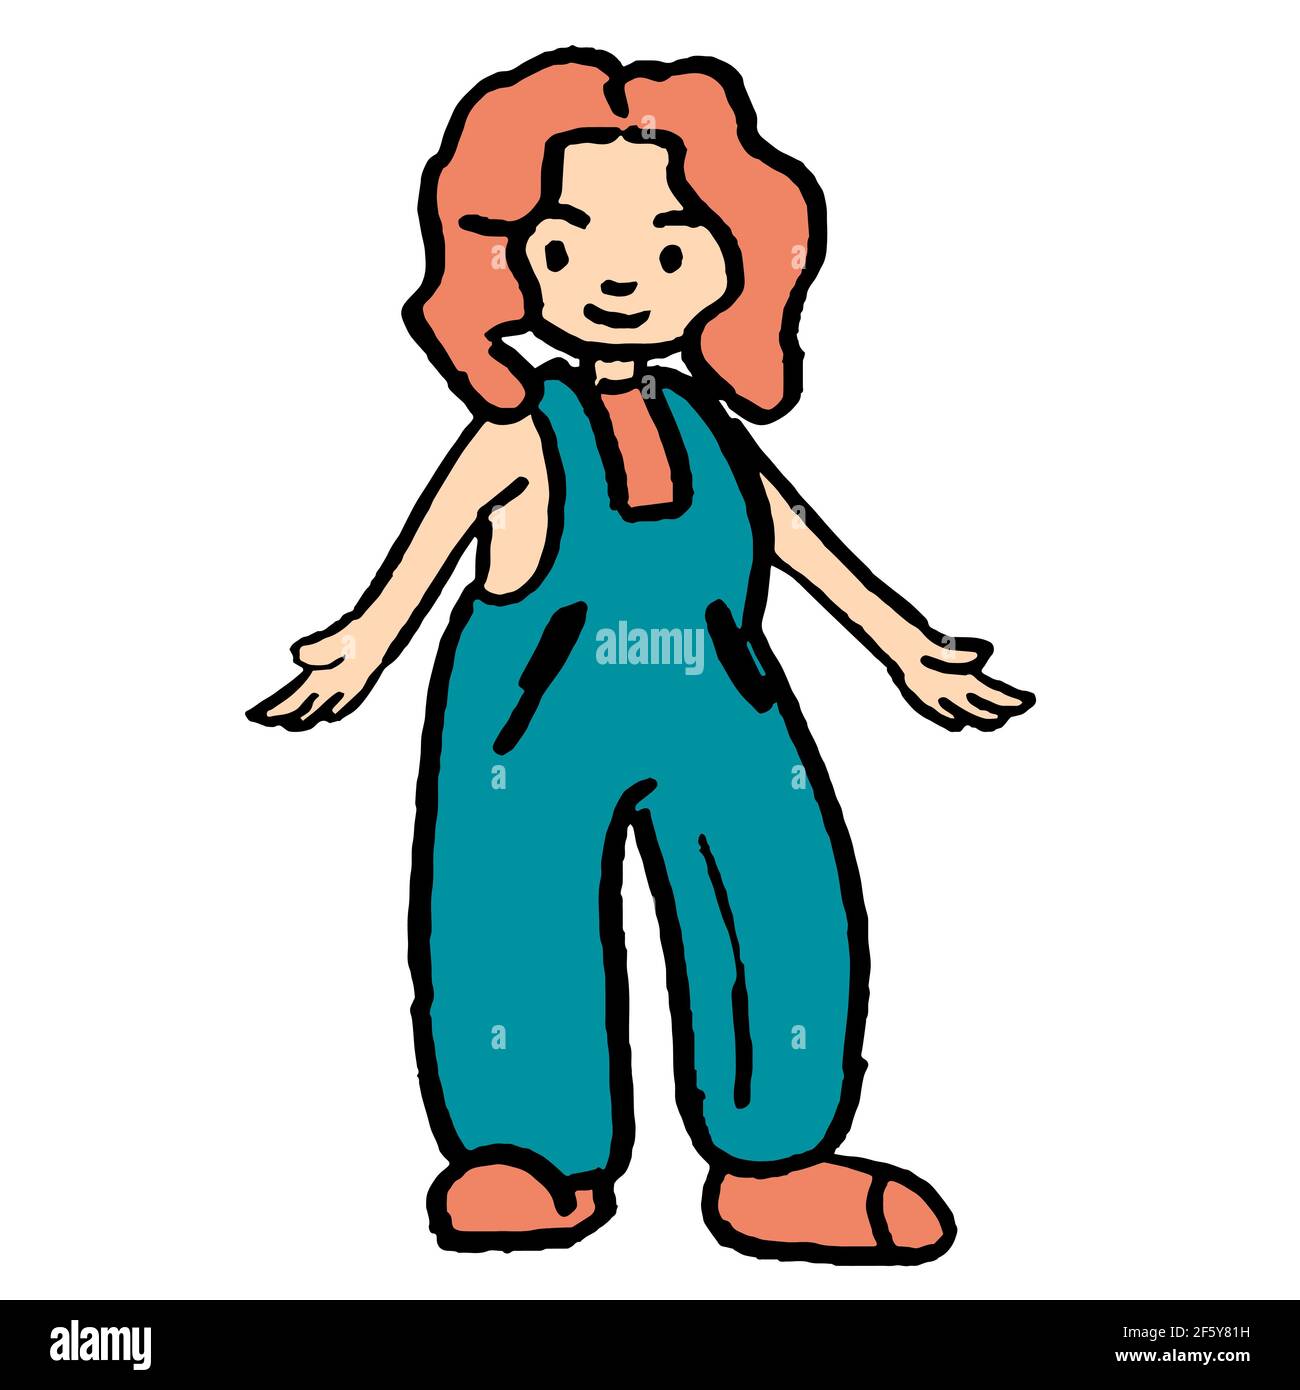 Farmer girl in turquois bib overall. Young redhead woman wants to hug. Happy female worker icon for farm logo, agrarian label, feminine symbol. White Stock Vector